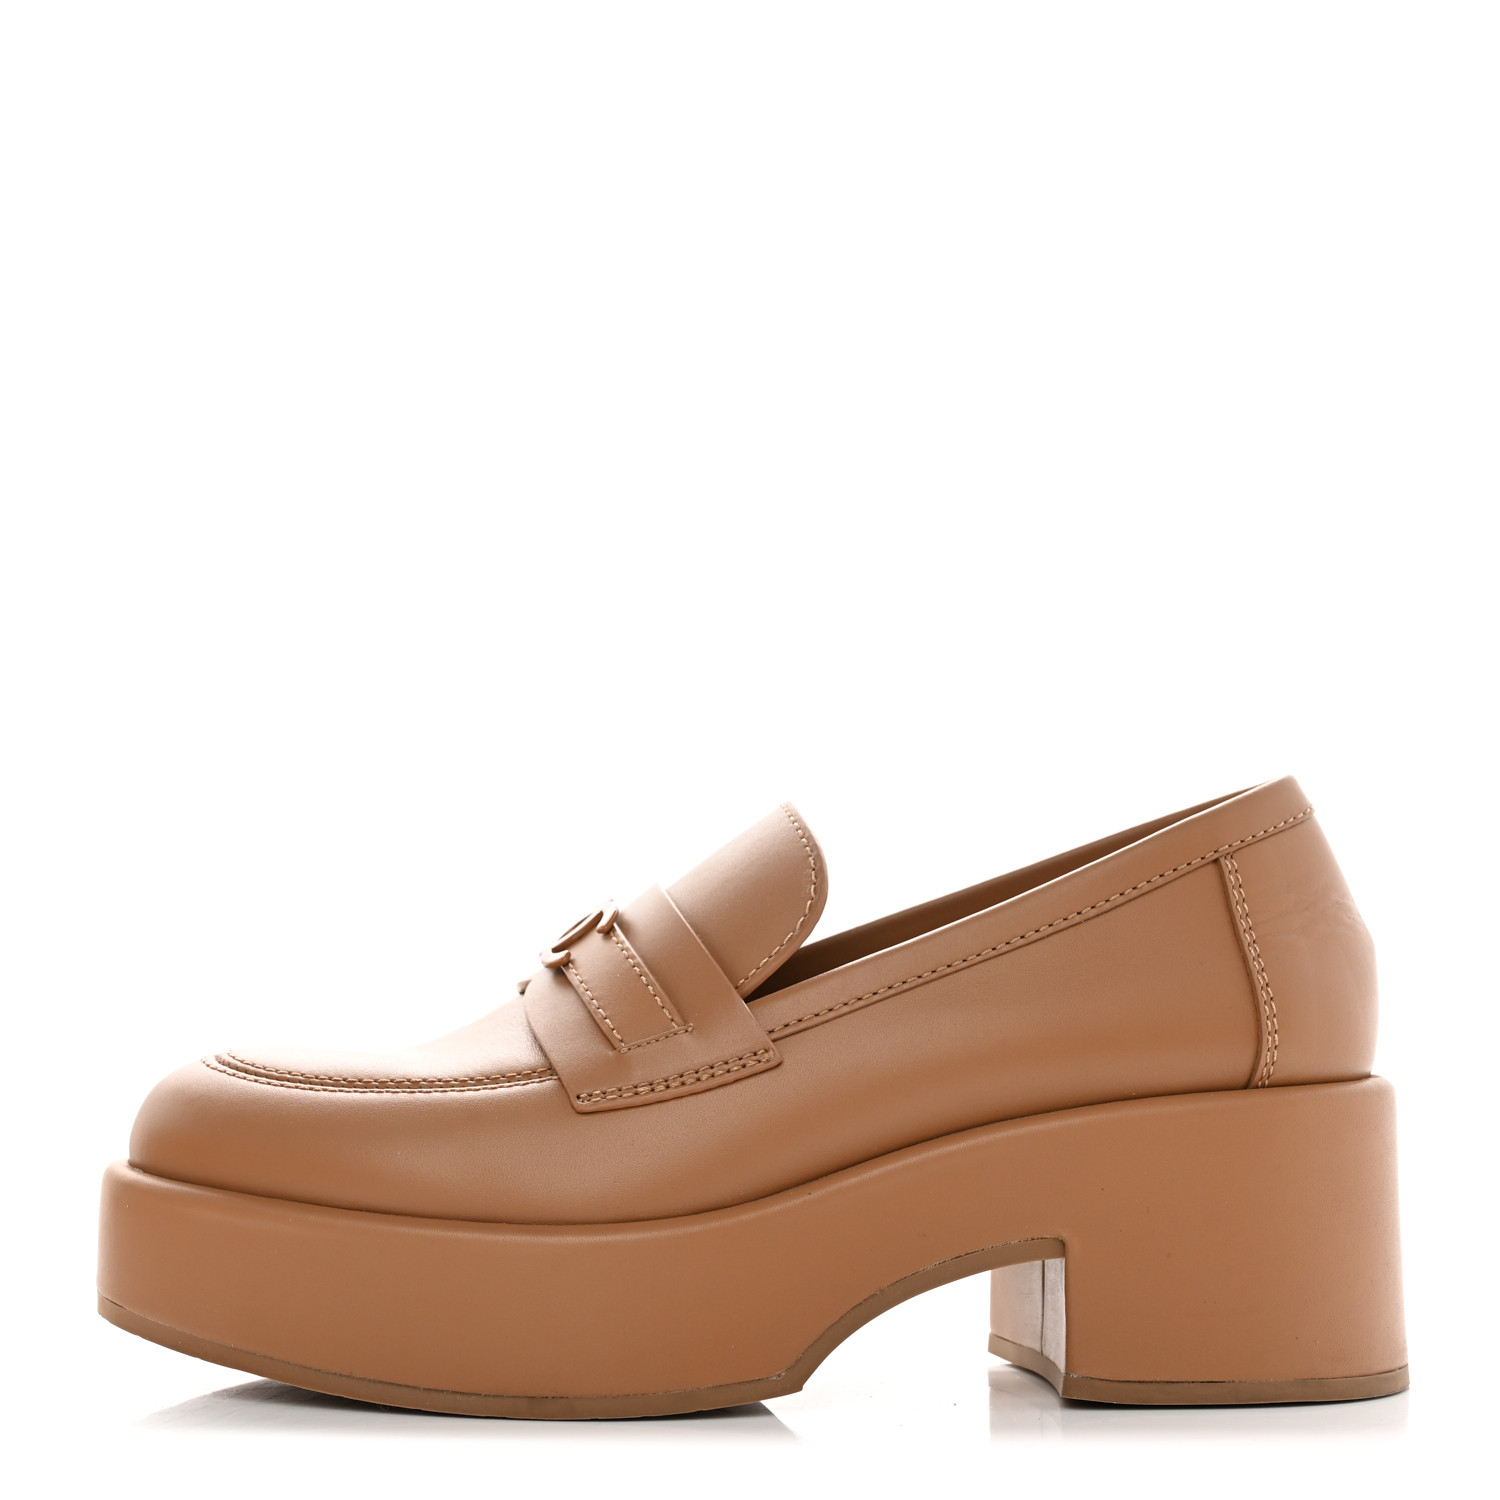 side view image of CHANEL Calfskin CC Platform Loafers in the color Beige by FASHIONPHILE